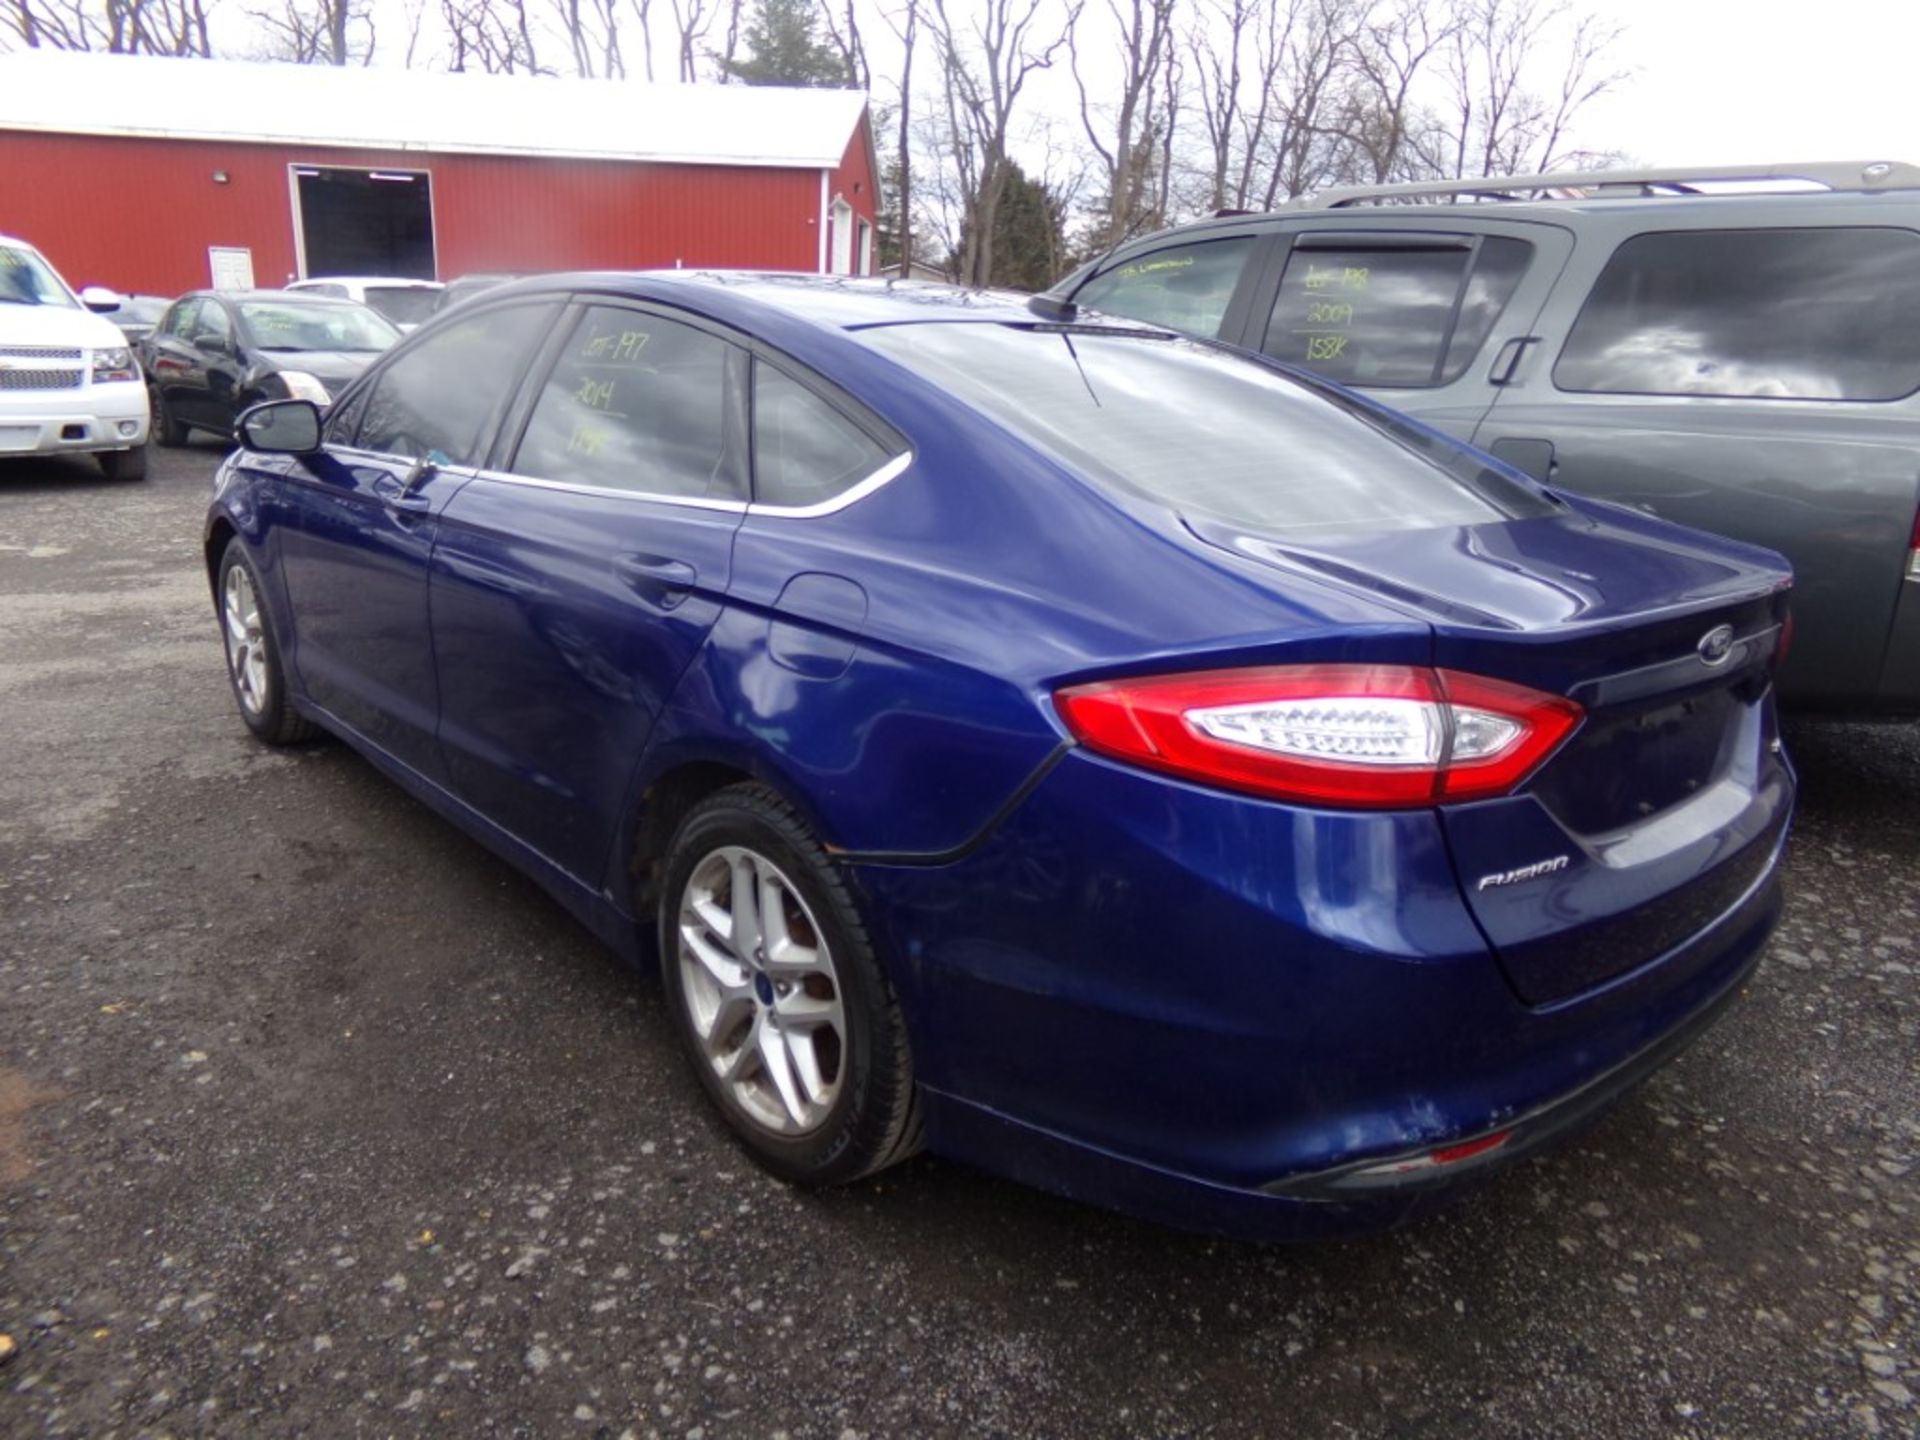 2014 Ford Fusion SE, Blue, 174,739 Miles, VIN#1FA6P0H7XE5365423, AIR BAG LIGHT IS ON, MINOR DAMAGE - Image 3 of 18